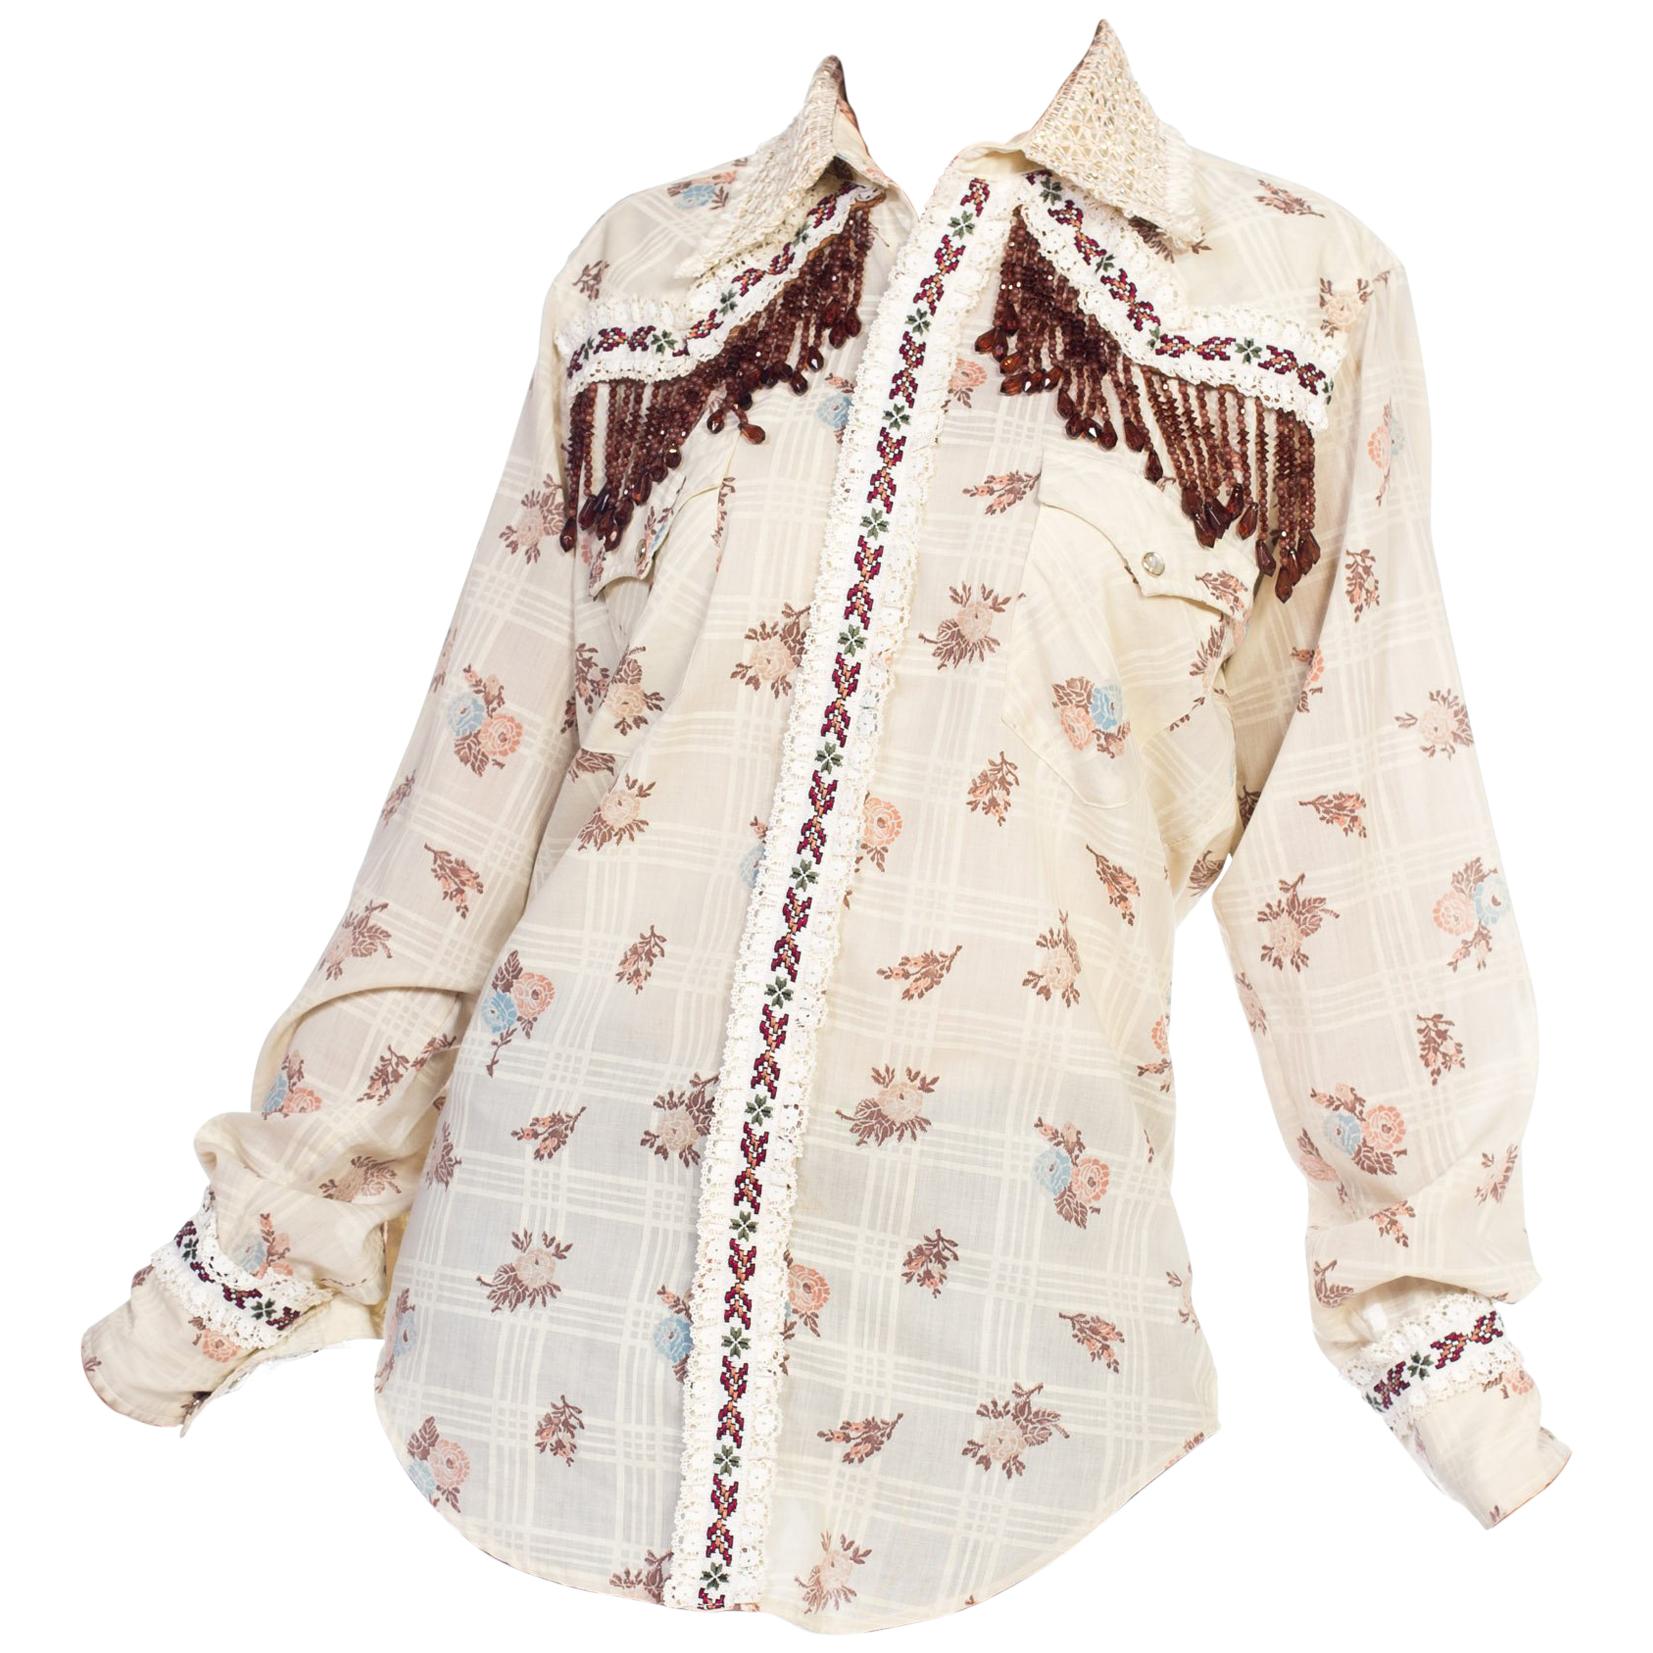 1970s Wrangler Floral Print Western Top With Lace and Ribbon